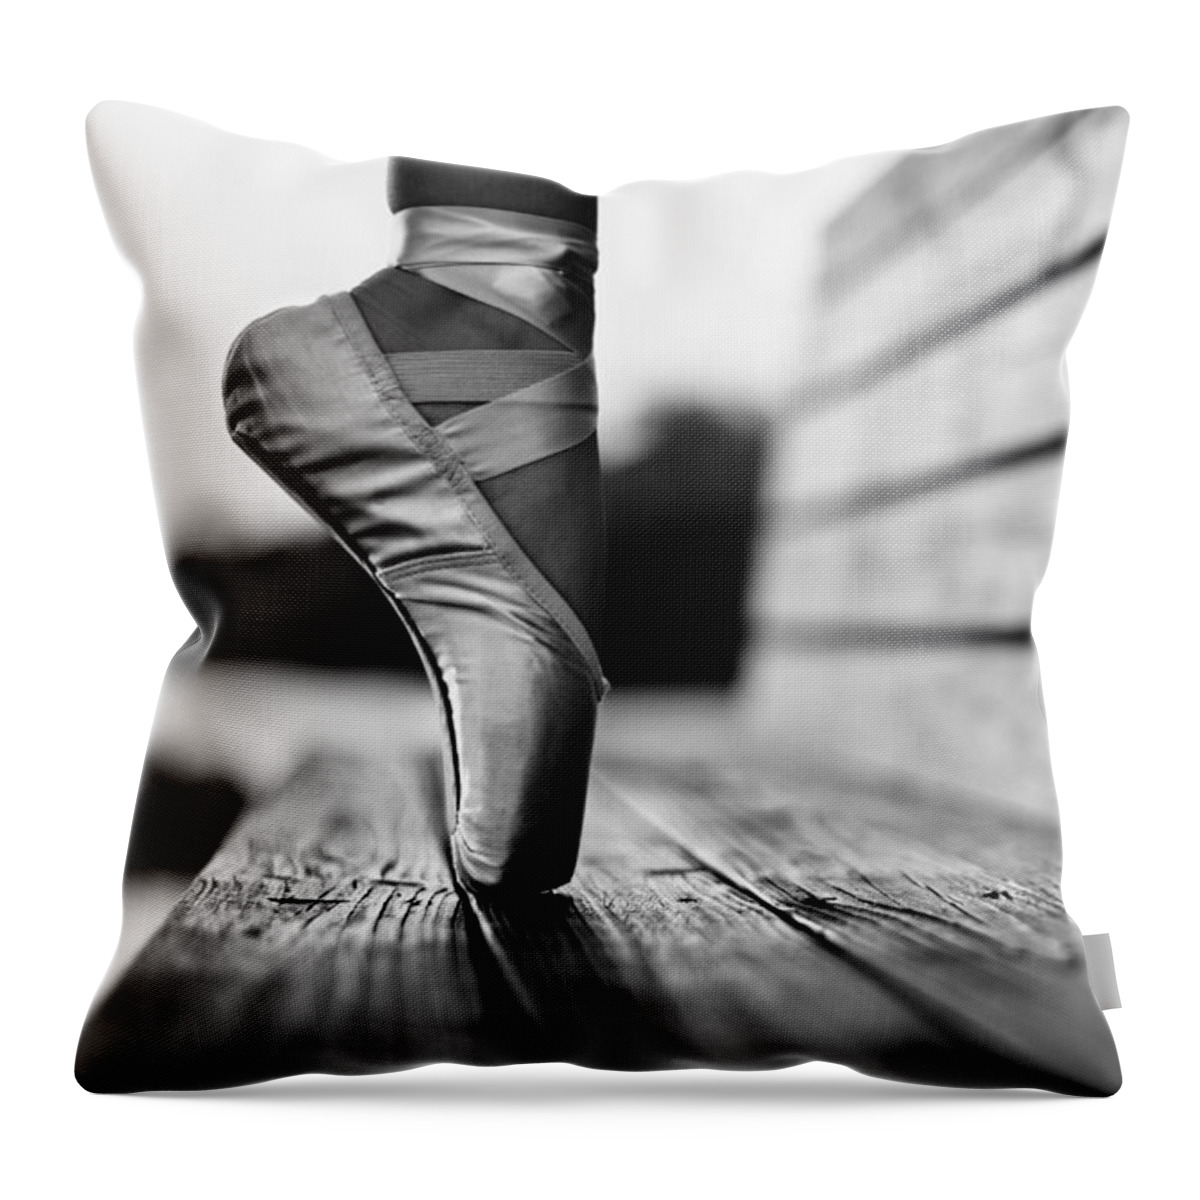 Pointe Shoes Throw Pillow featuring the photograph Aplomb by Laura Fasulo